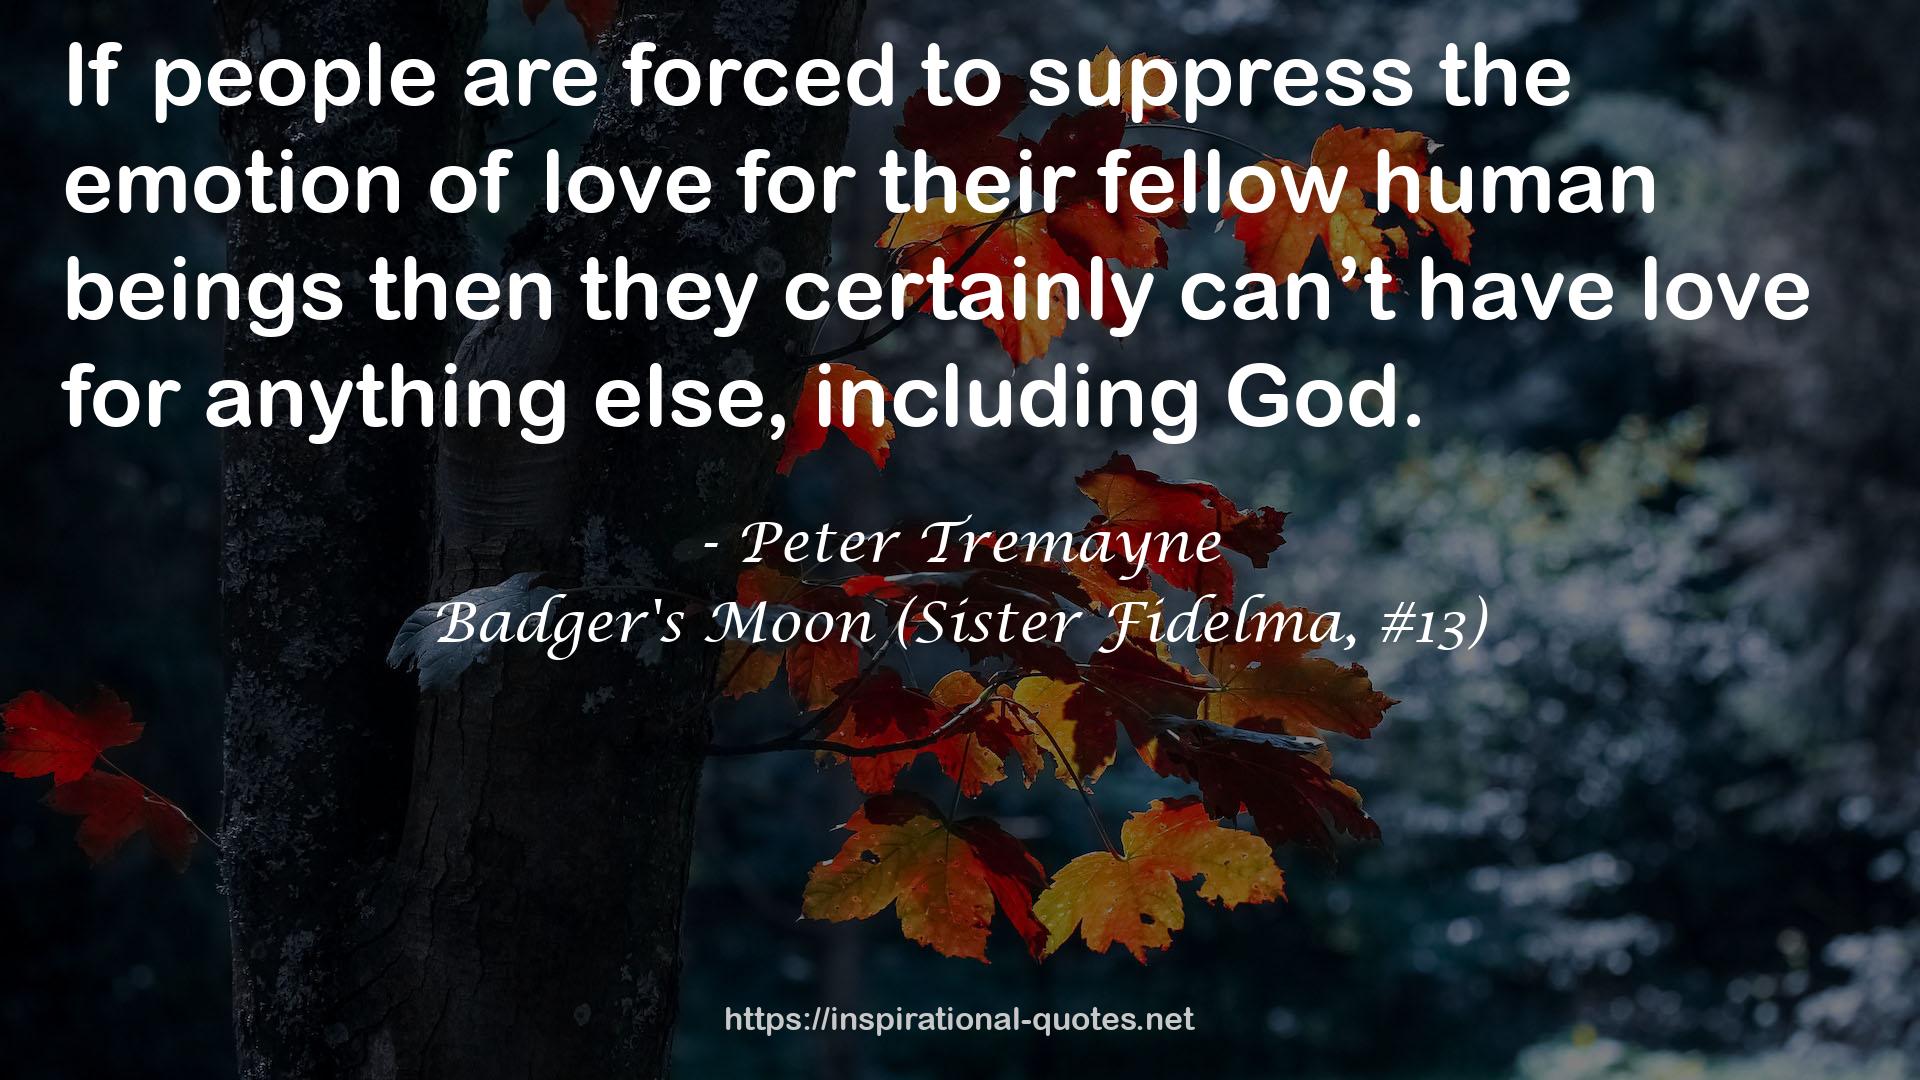 Badger's Moon (Sister Fidelma, #13) QUOTES